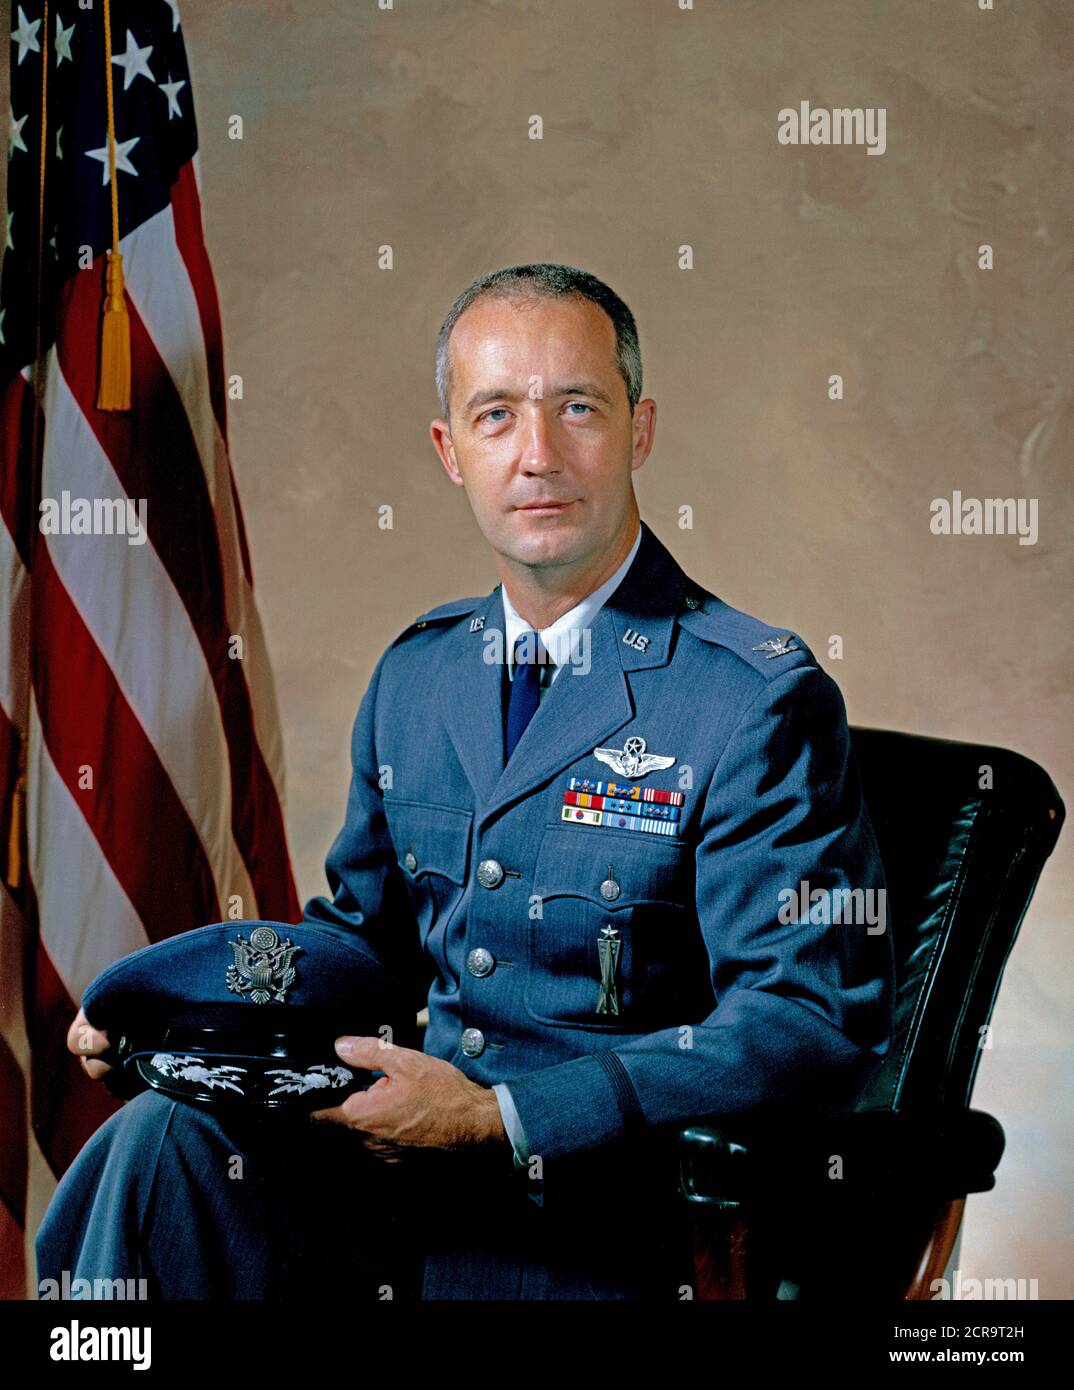 Portrait of astronaut James A. McDivitt, in his Air Force uniform with rank insignia showing he is Air Force Colonel Stock Photo